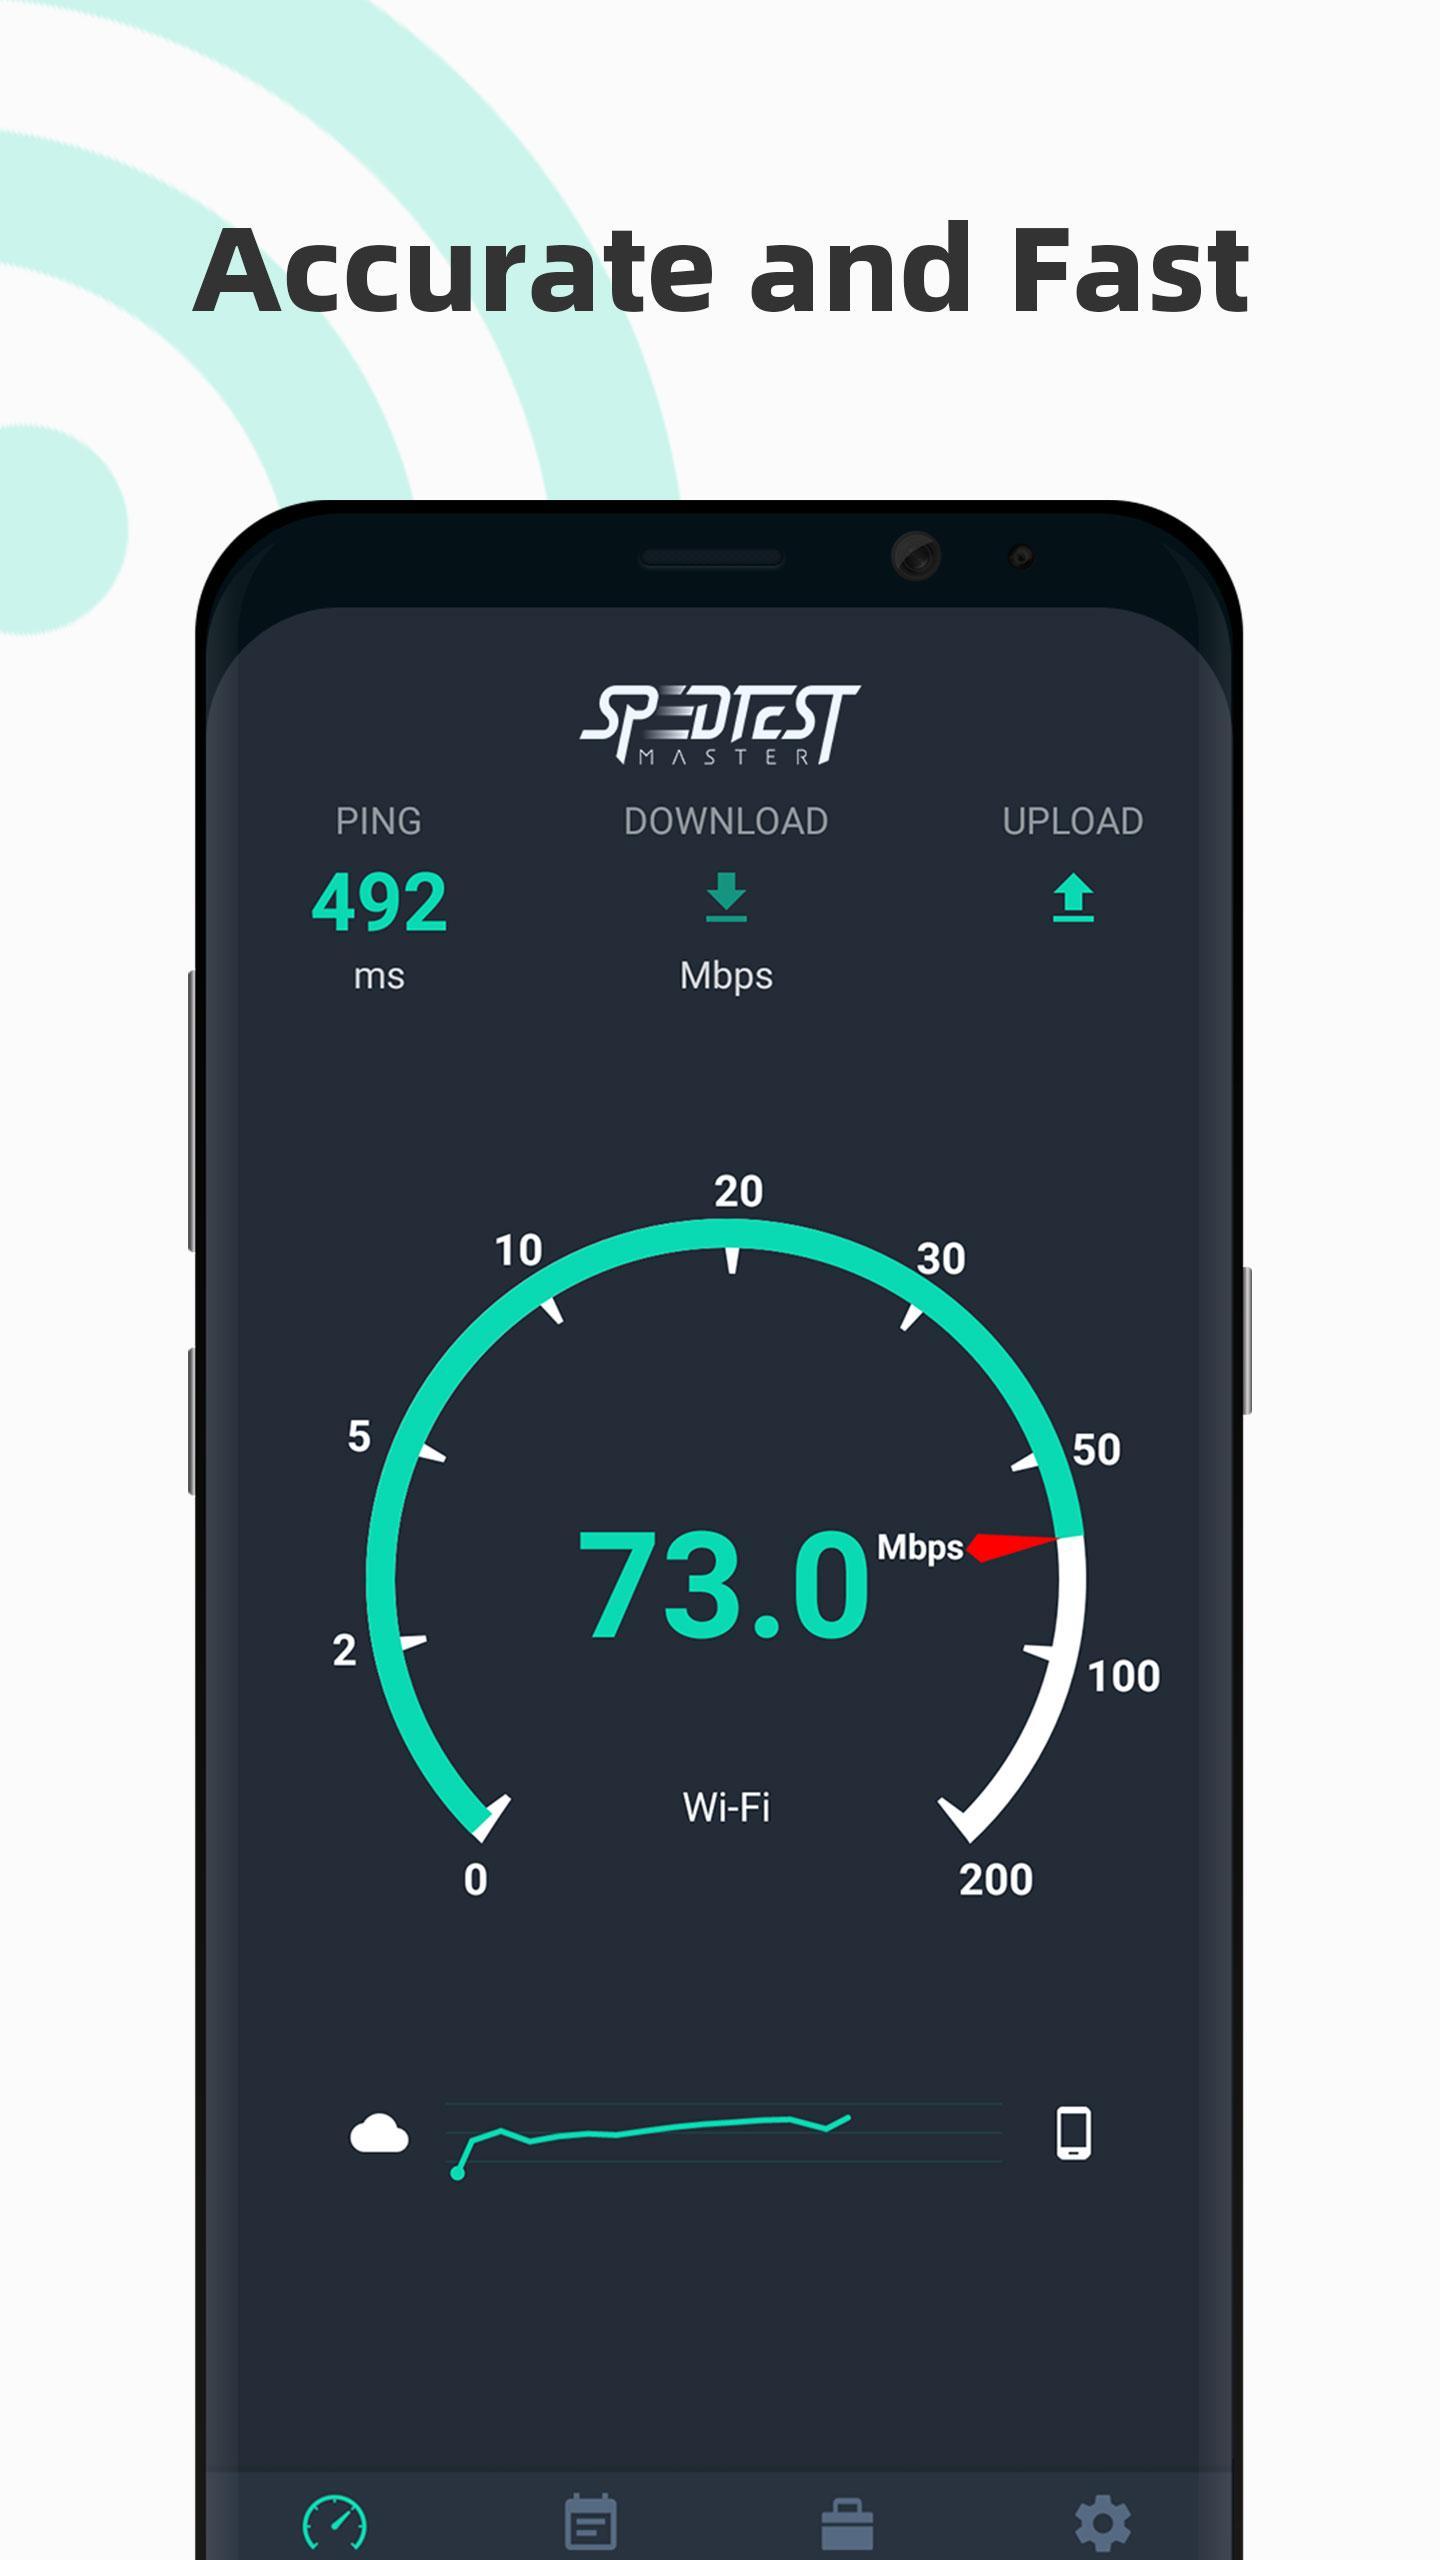 Free Internet speed test - SpeedTest Master for Android ...